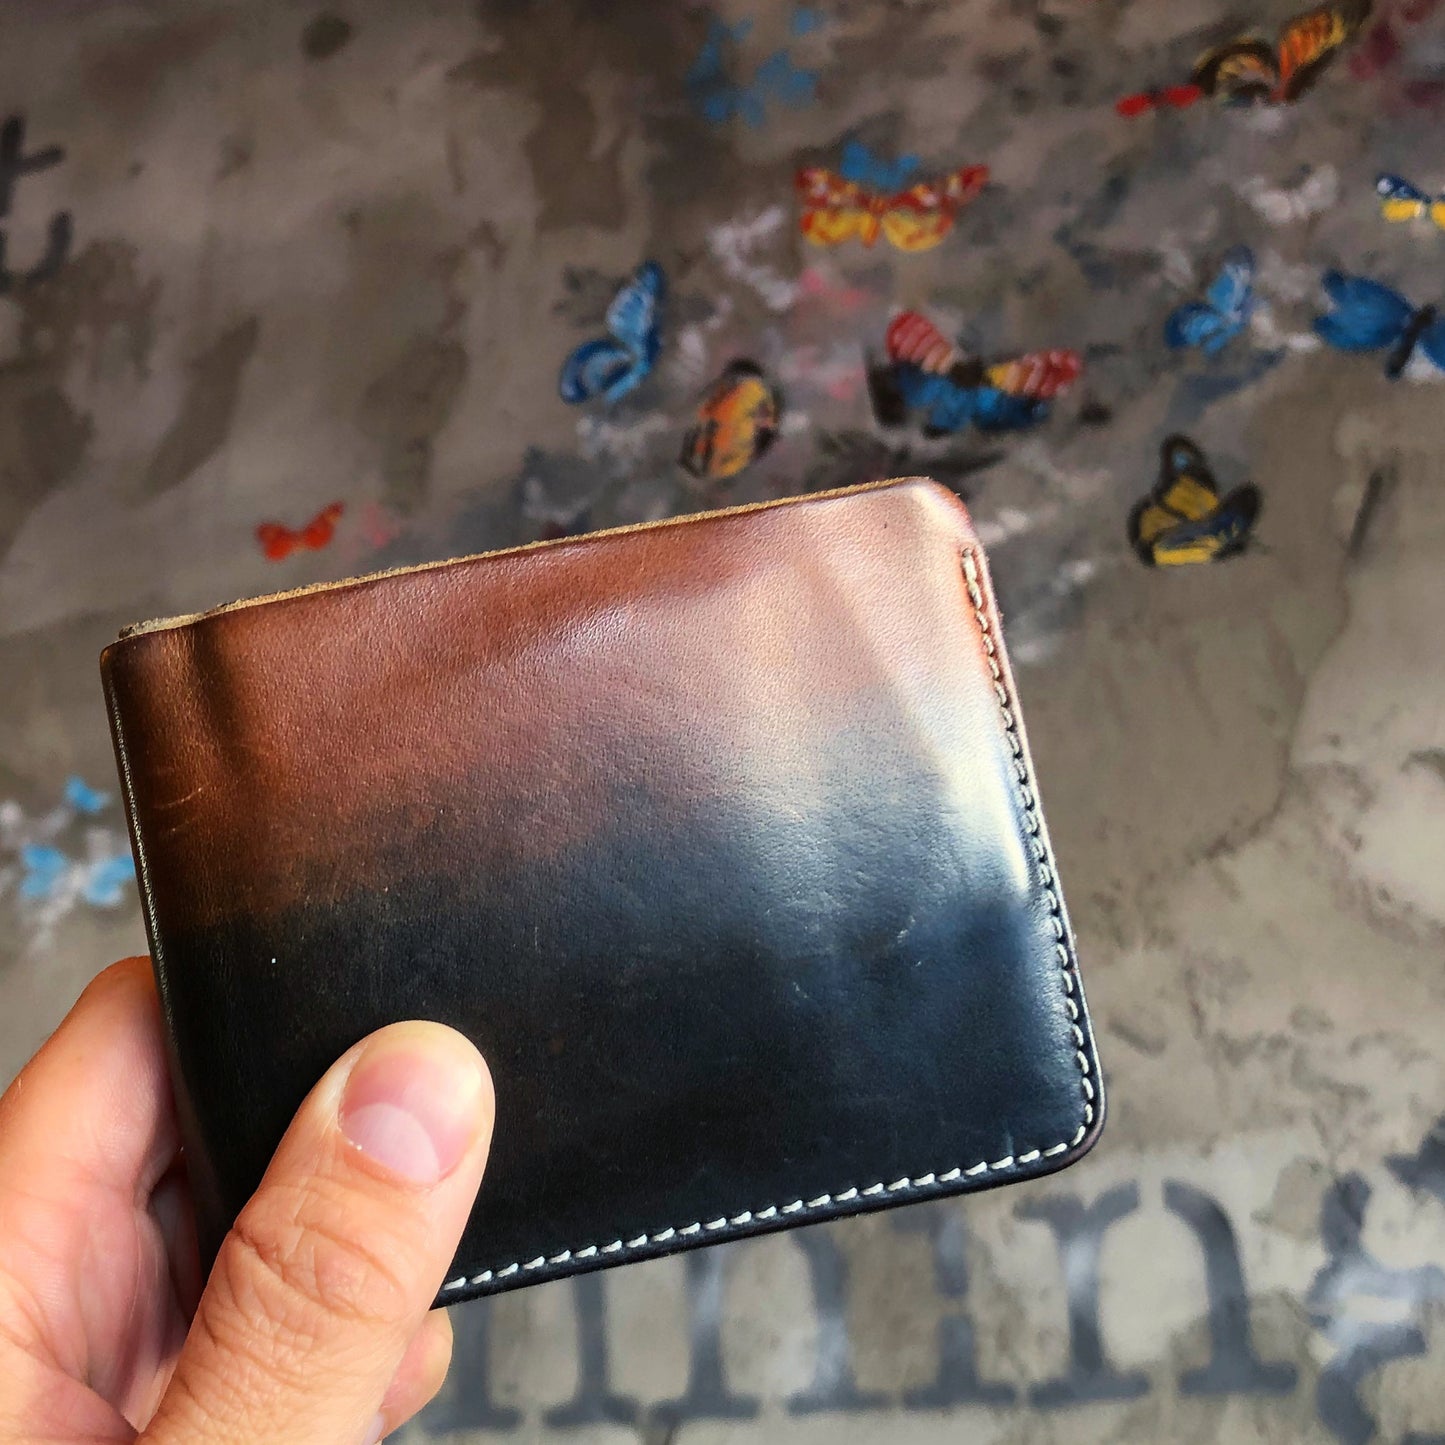 Indigo Dyed Natural Vegetable Tanned Leather Bifold with Deep Indigo Dip